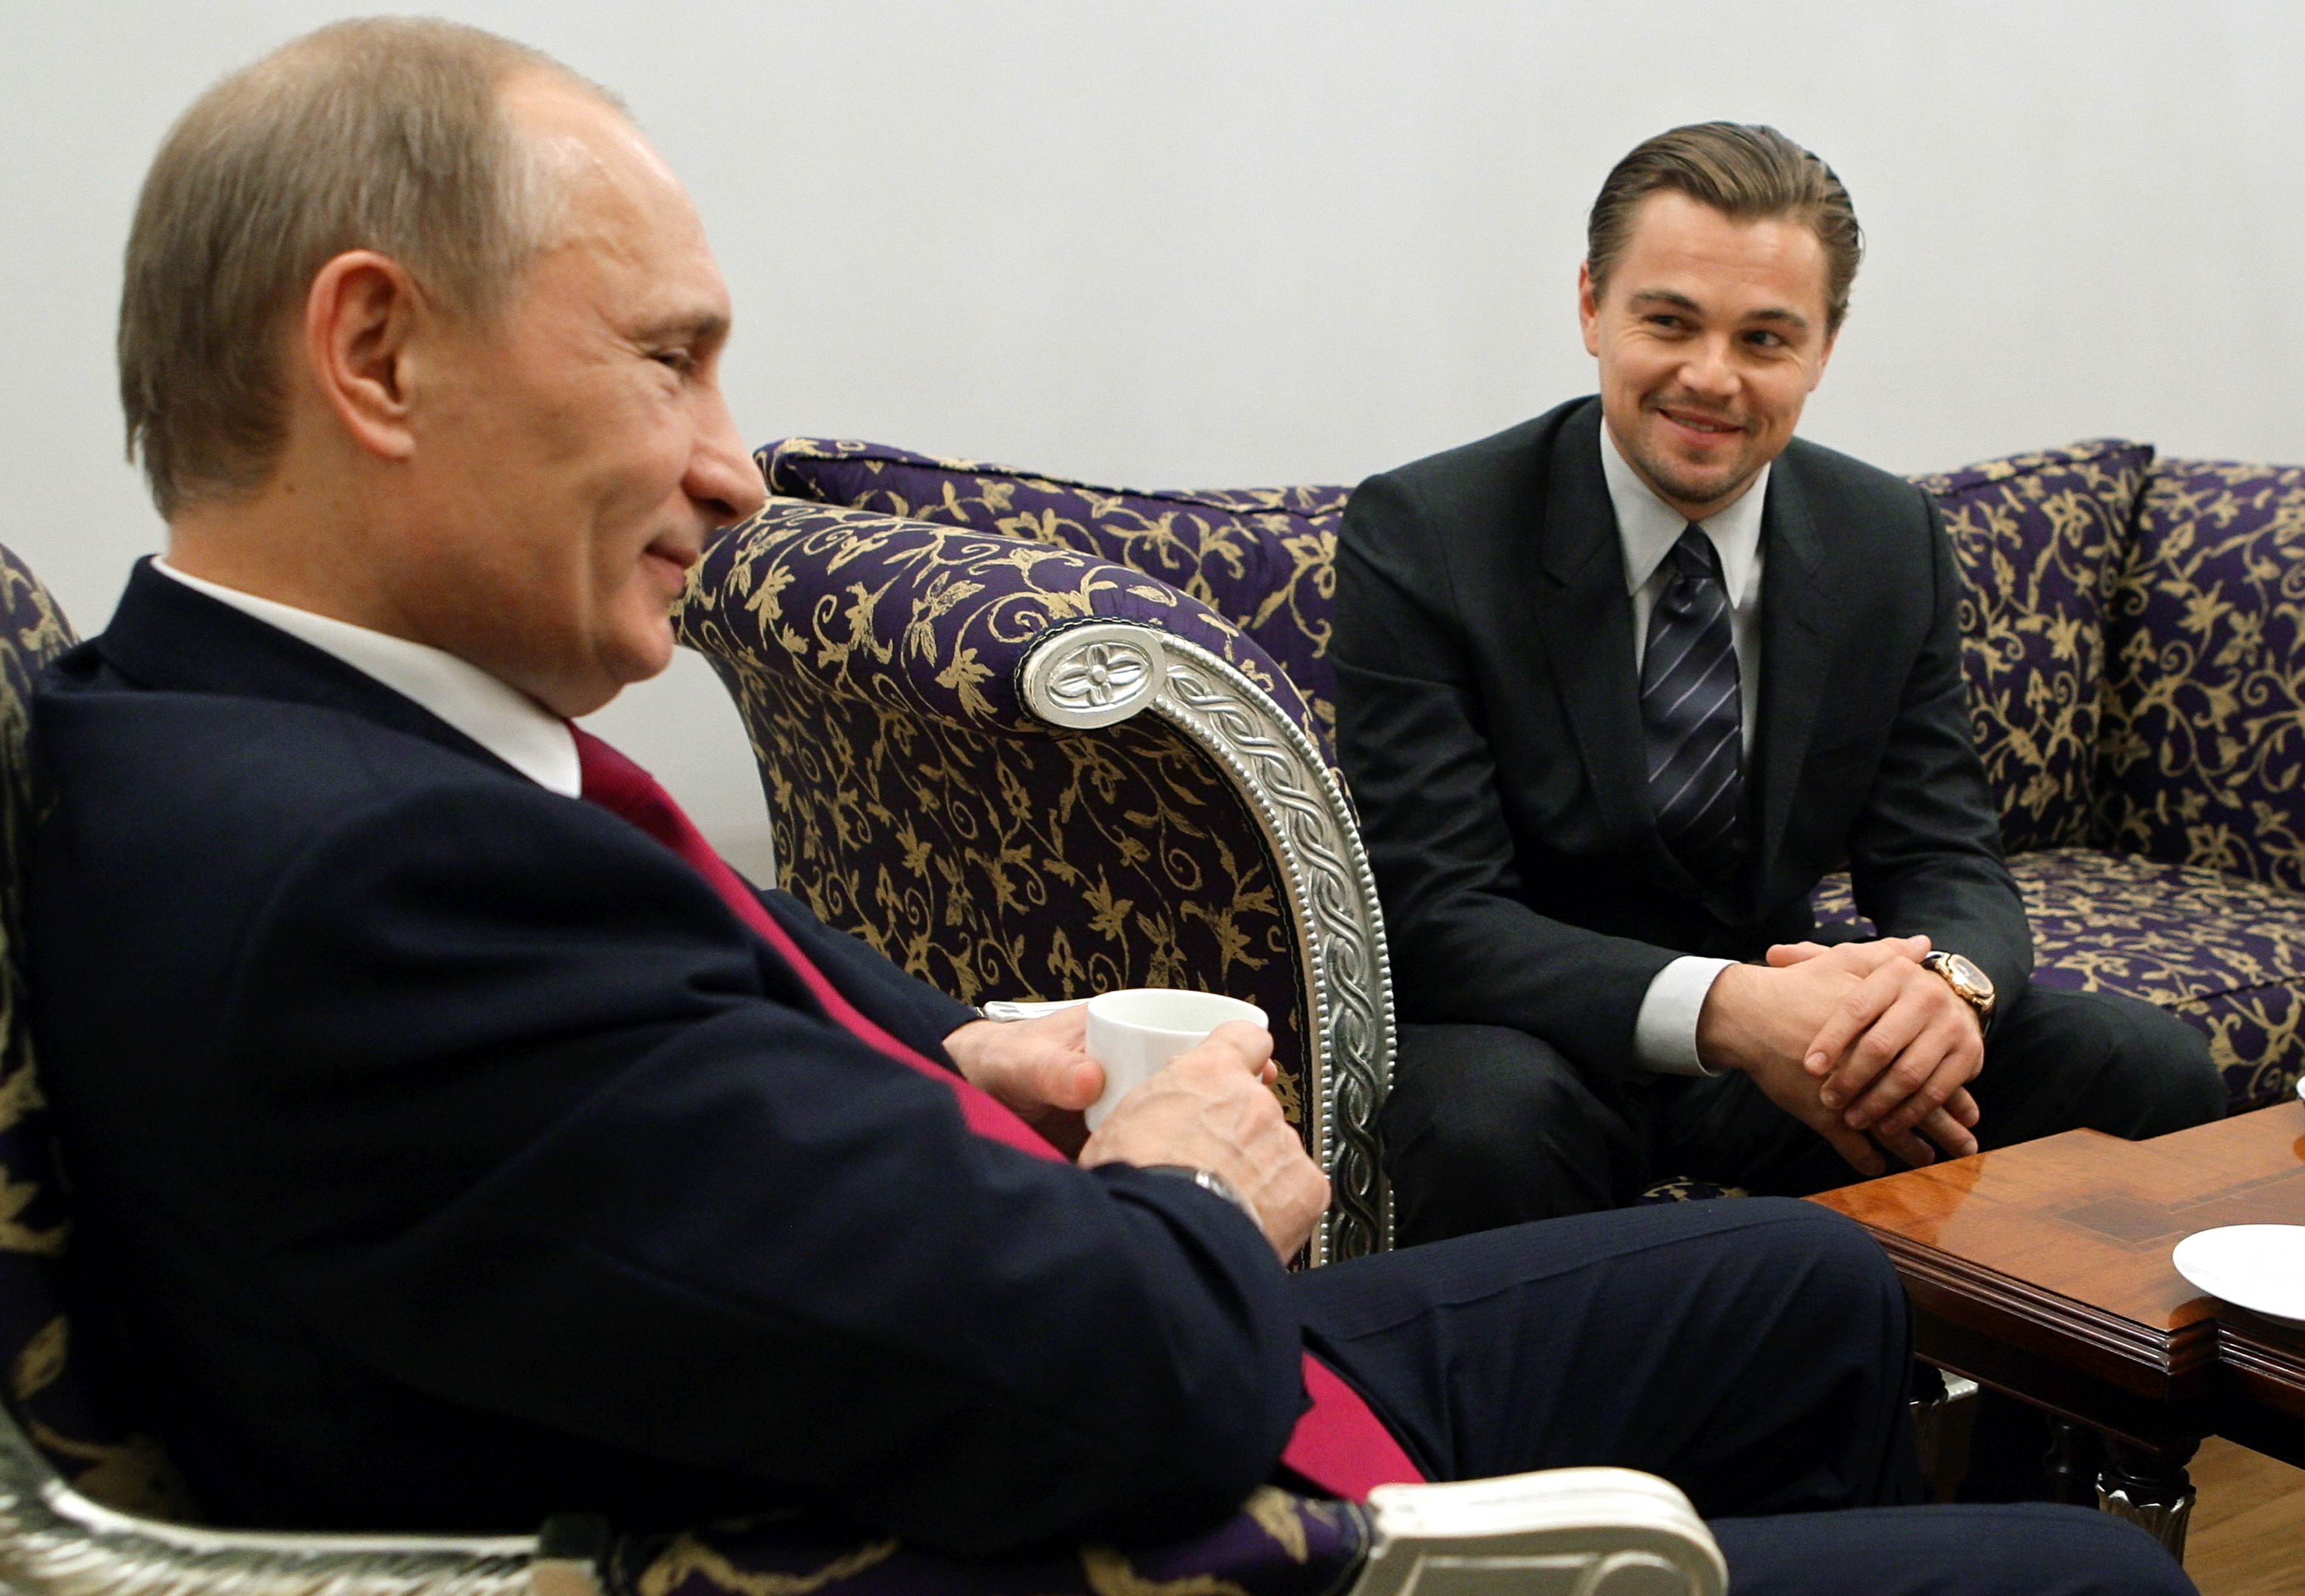 Russia's Prime Minister Vladimir Putin (L) speaks with Leonardo DiCaprio after a concert to mark the International Tiger Conservation Forum at the Mikhailovsky theater in Saint Petersburg on Nov. 23, 2010.